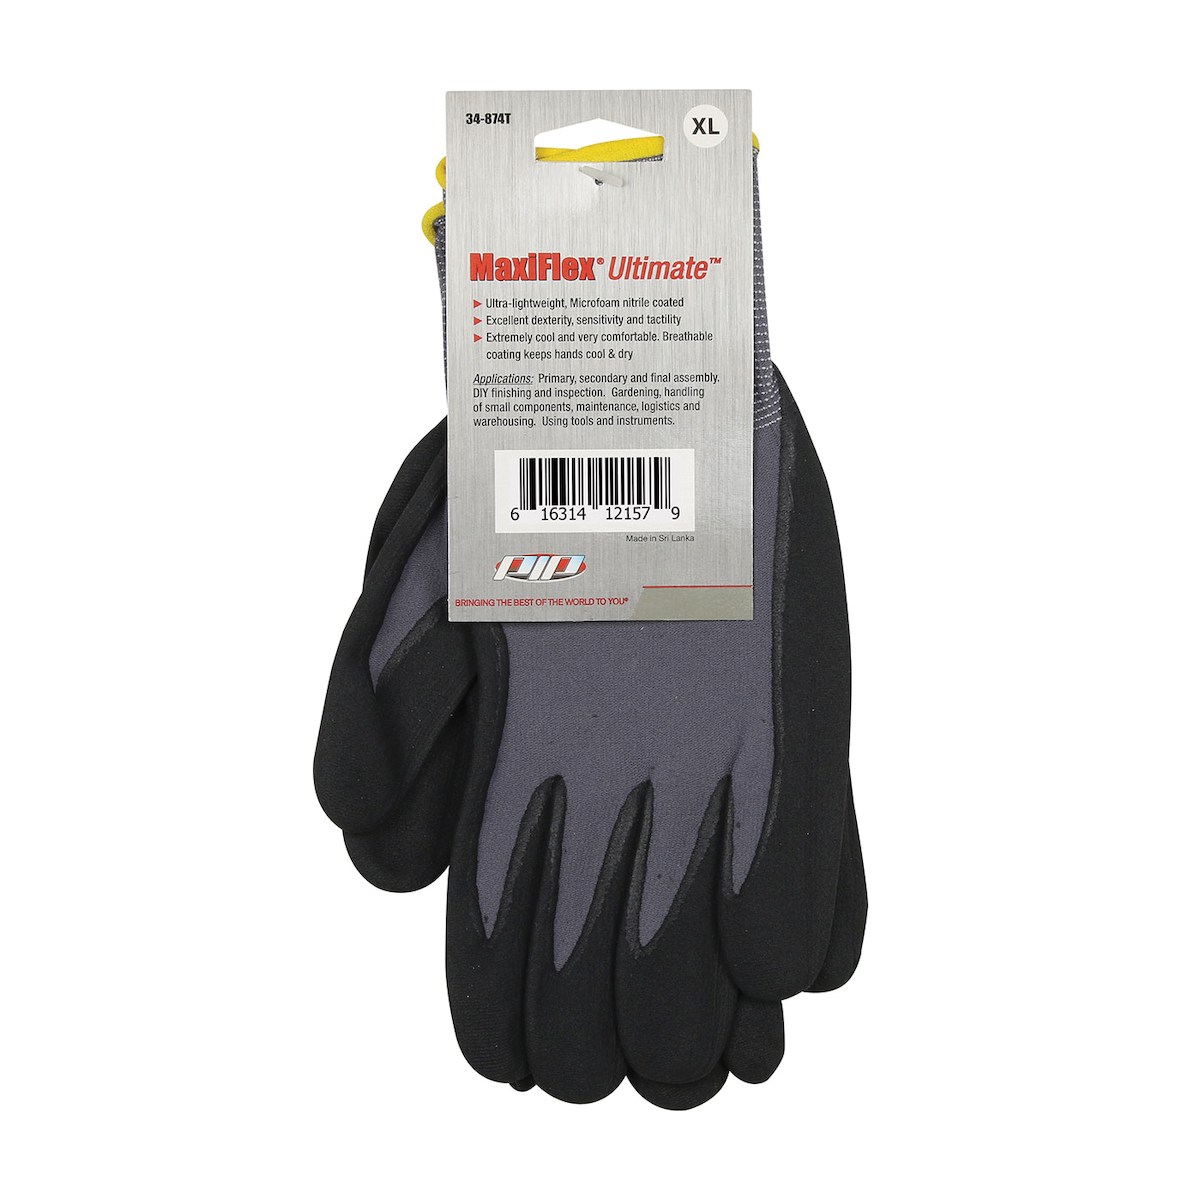 Showabest 451 Atlas Therma Fit Gloves